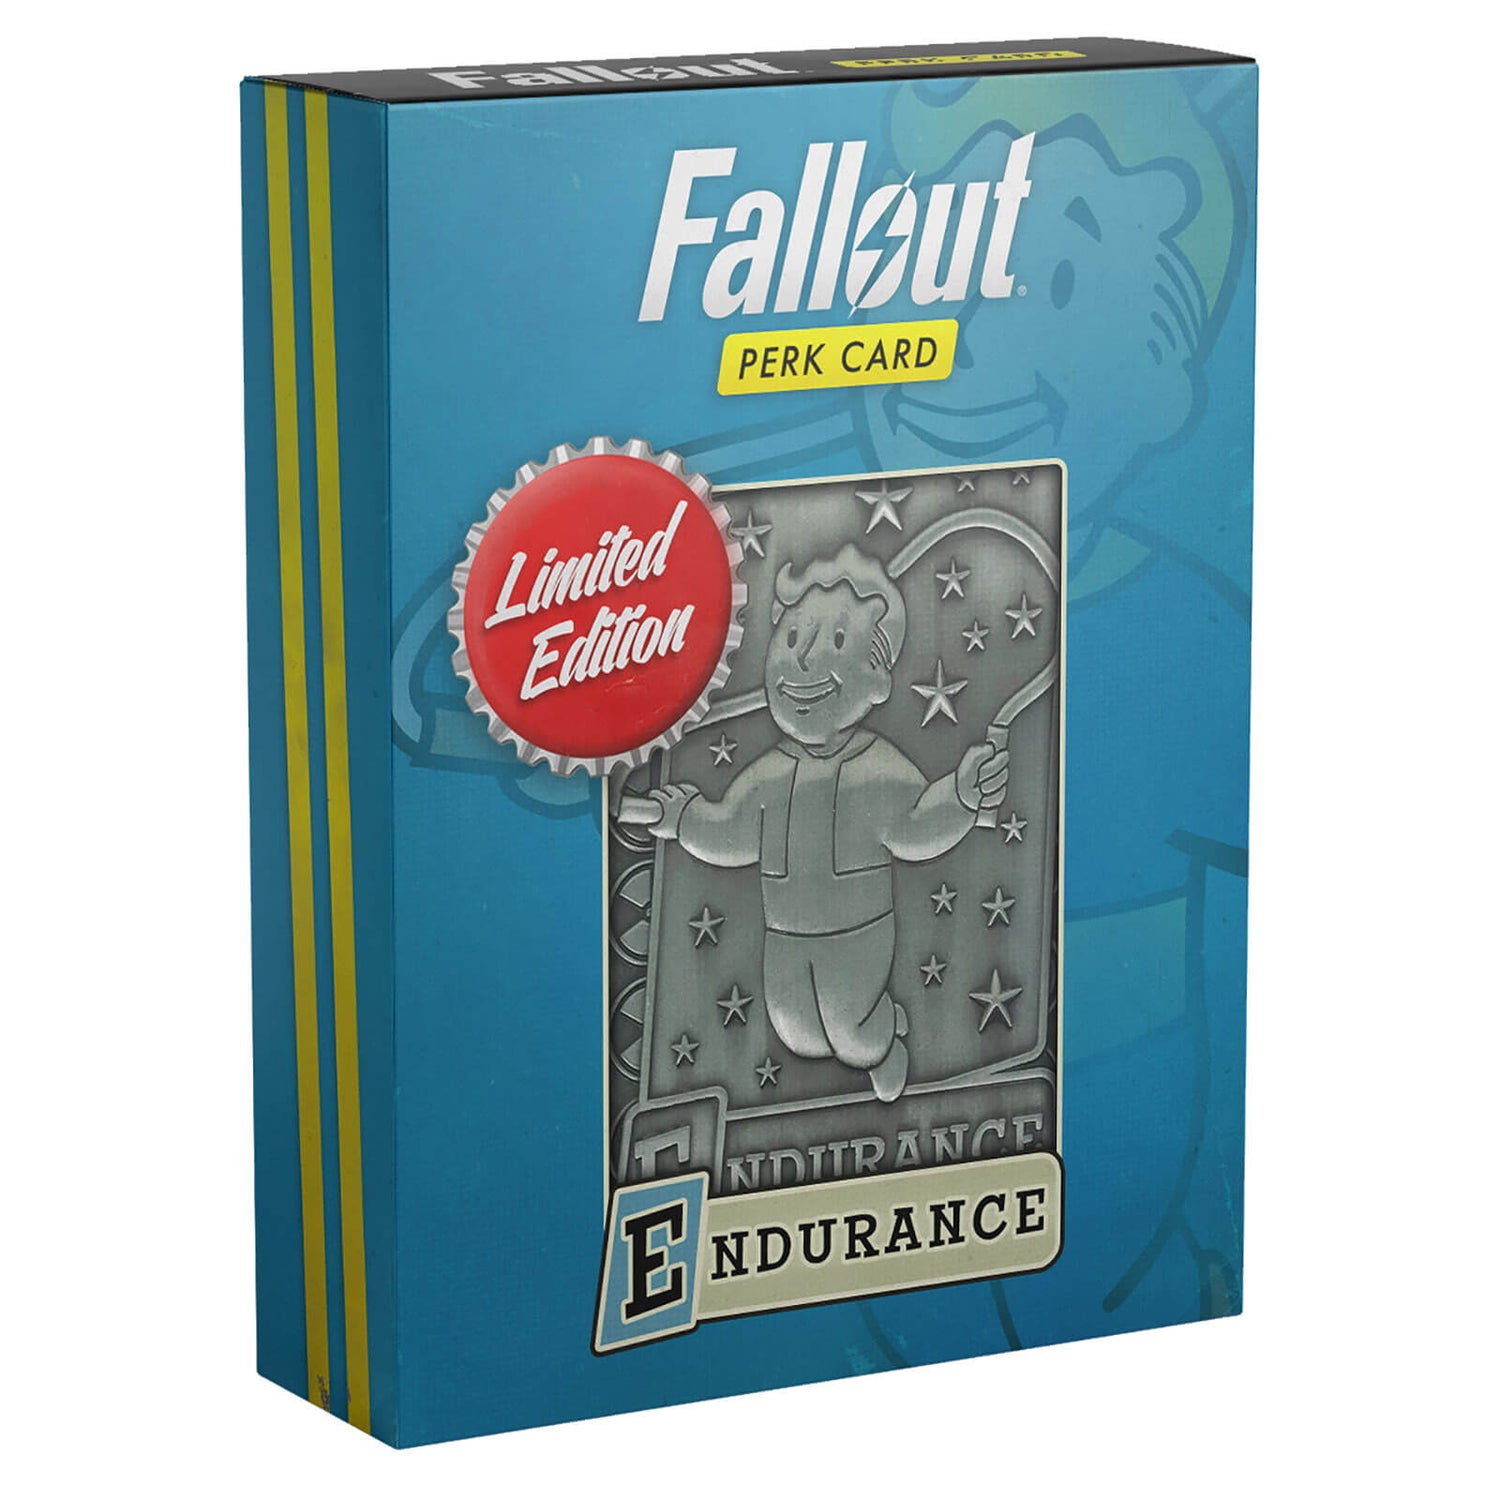 Fallout Limited Edition Perk Card - Endurance (#3 out of 7)